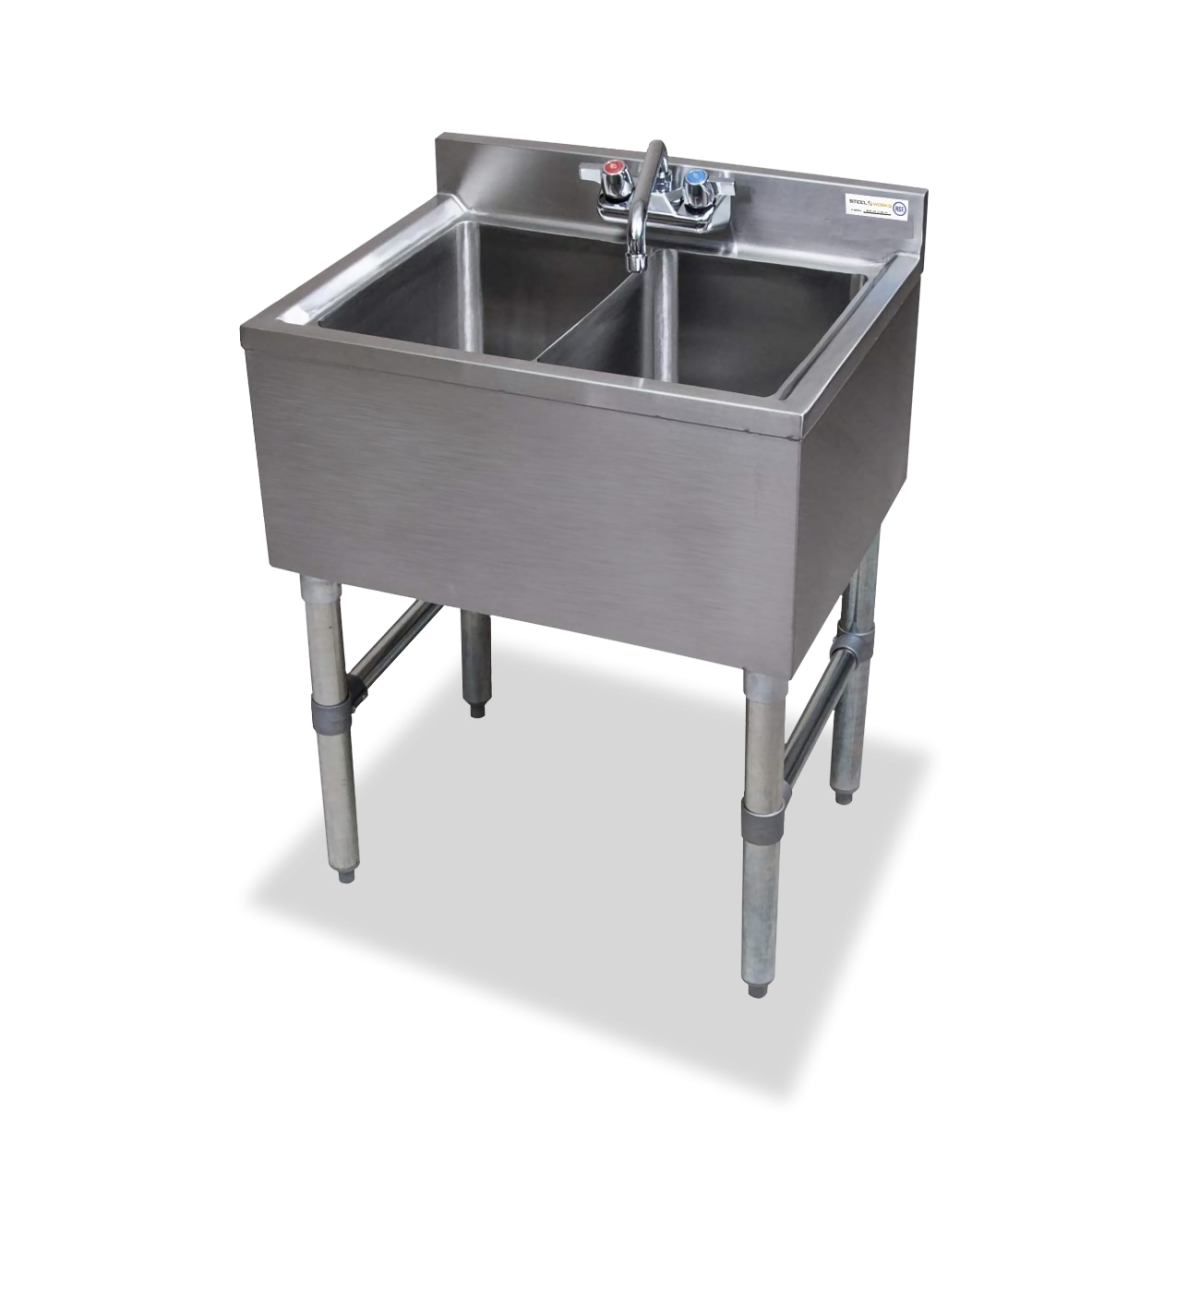 18 gauge Two Compartment Stainless Steel Underbar Sink - SWBAR2B26